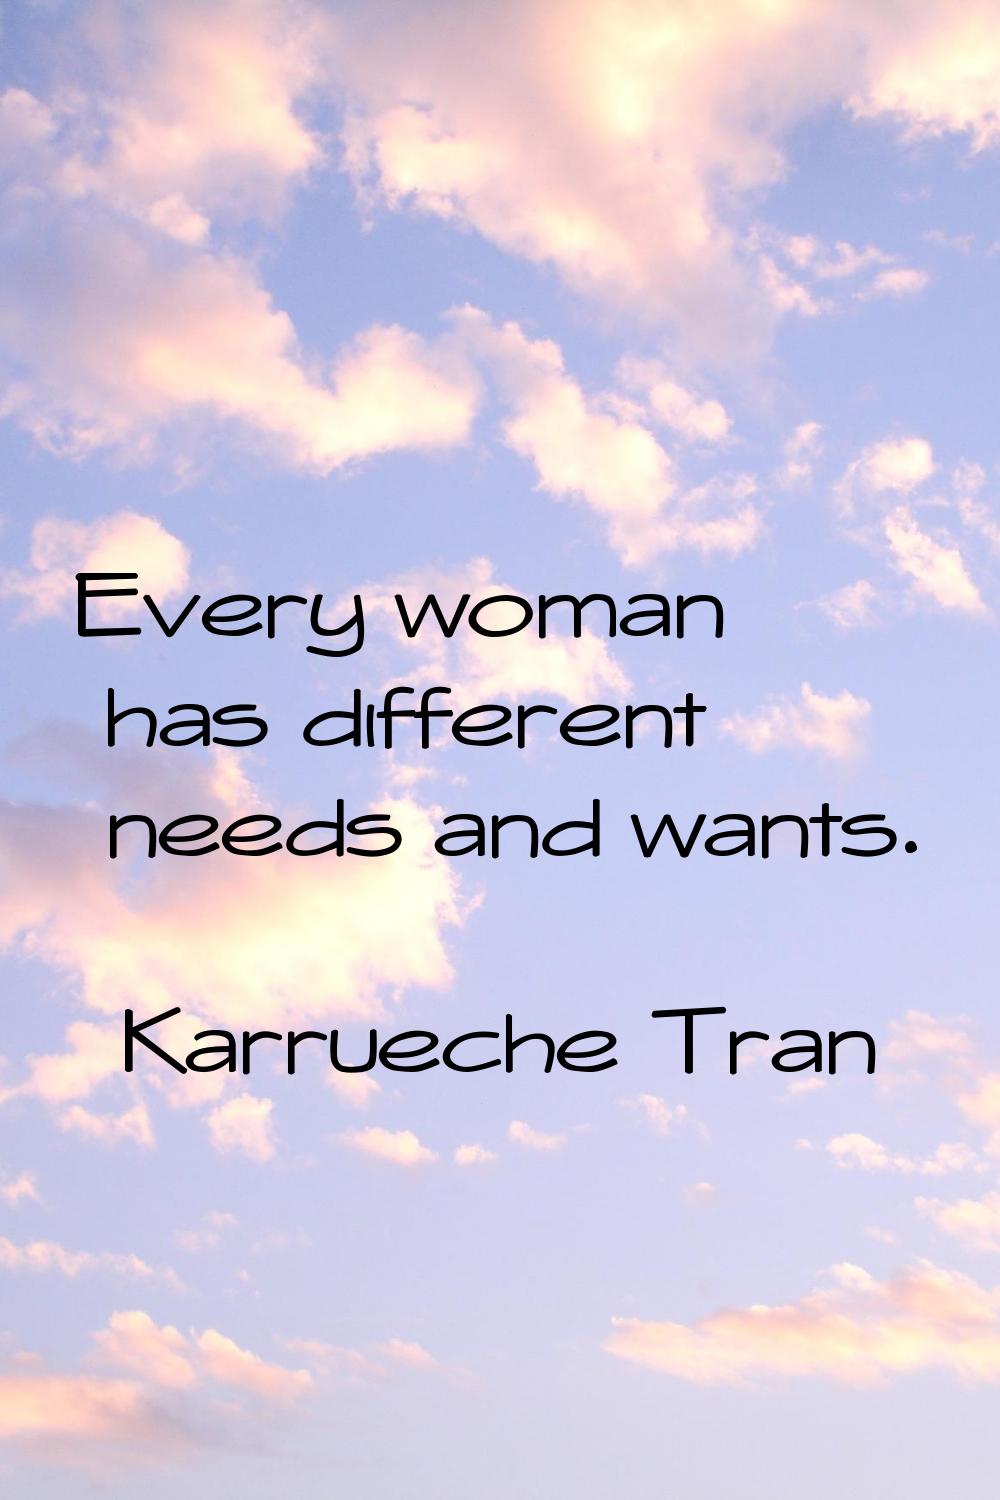 Every woman has different needs and wants.